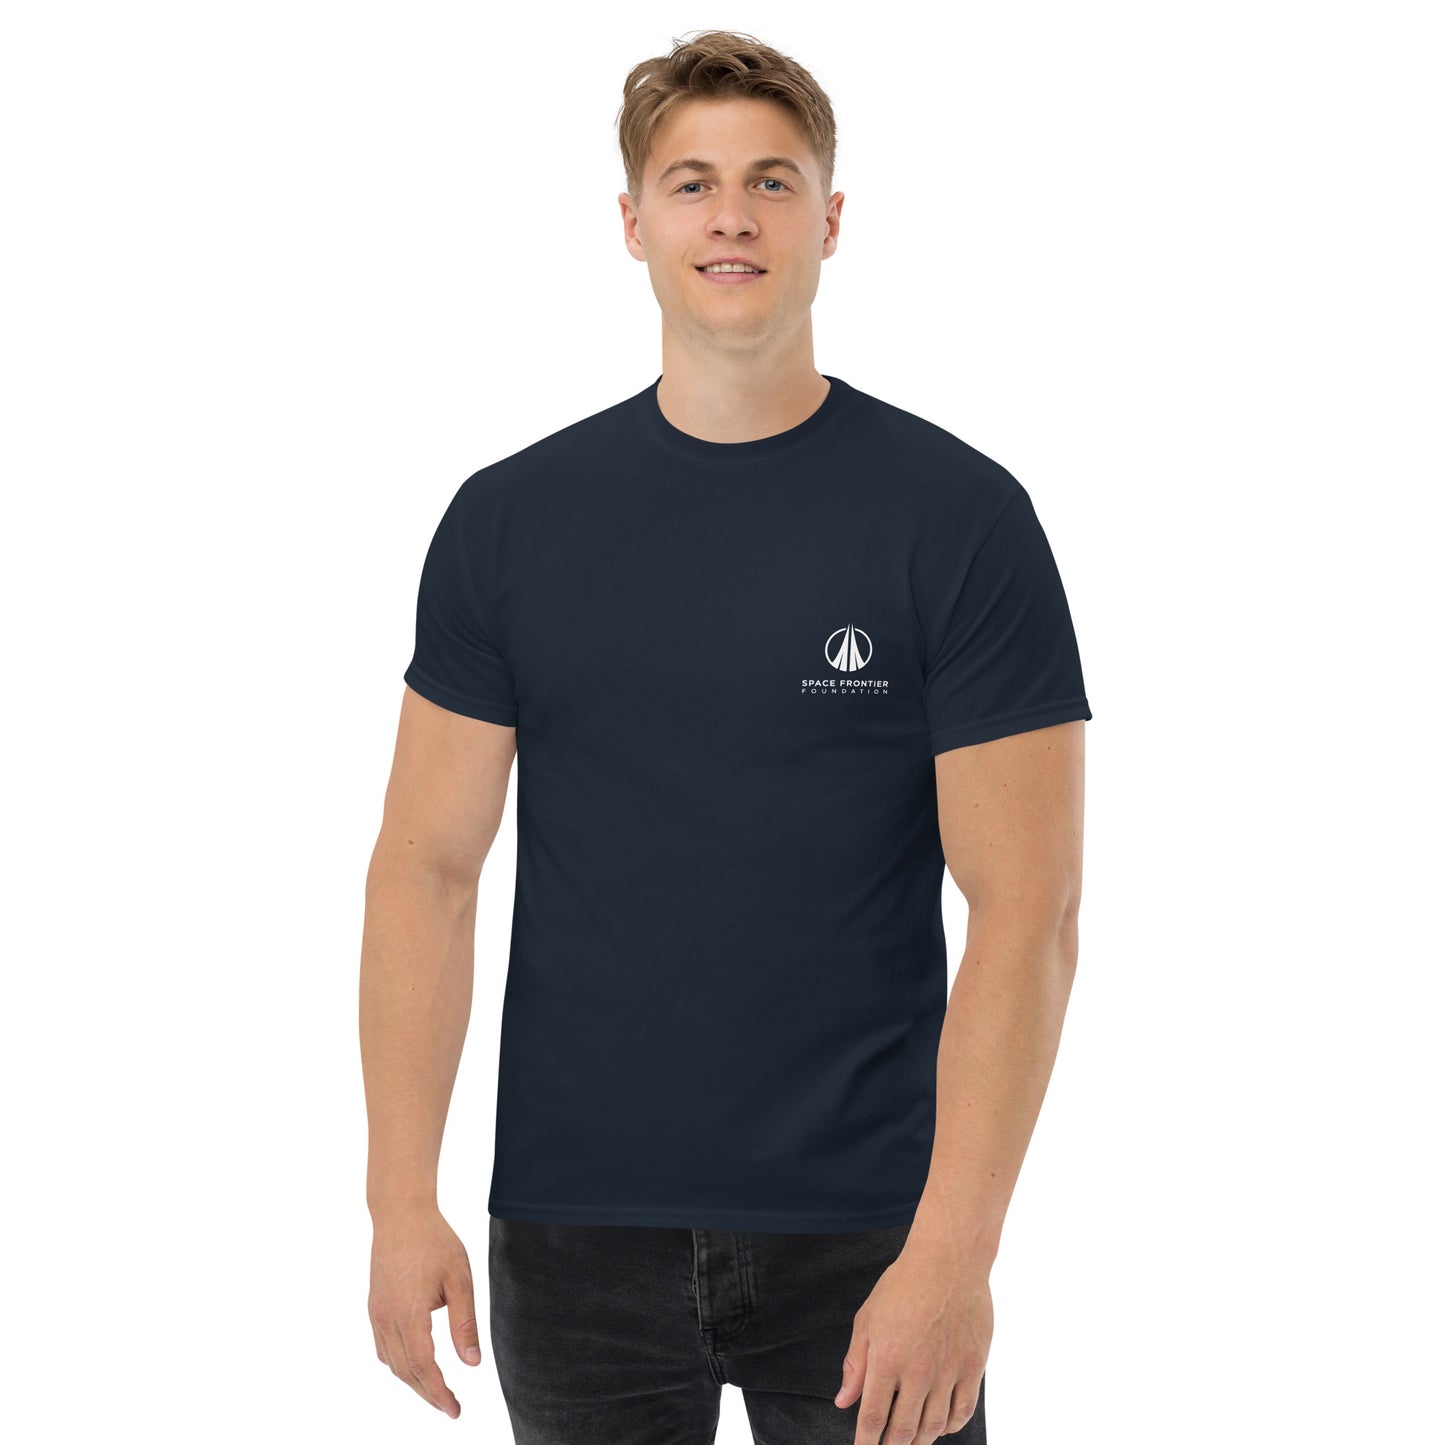 Classic Men's T-Shirt with small Foundation Logo